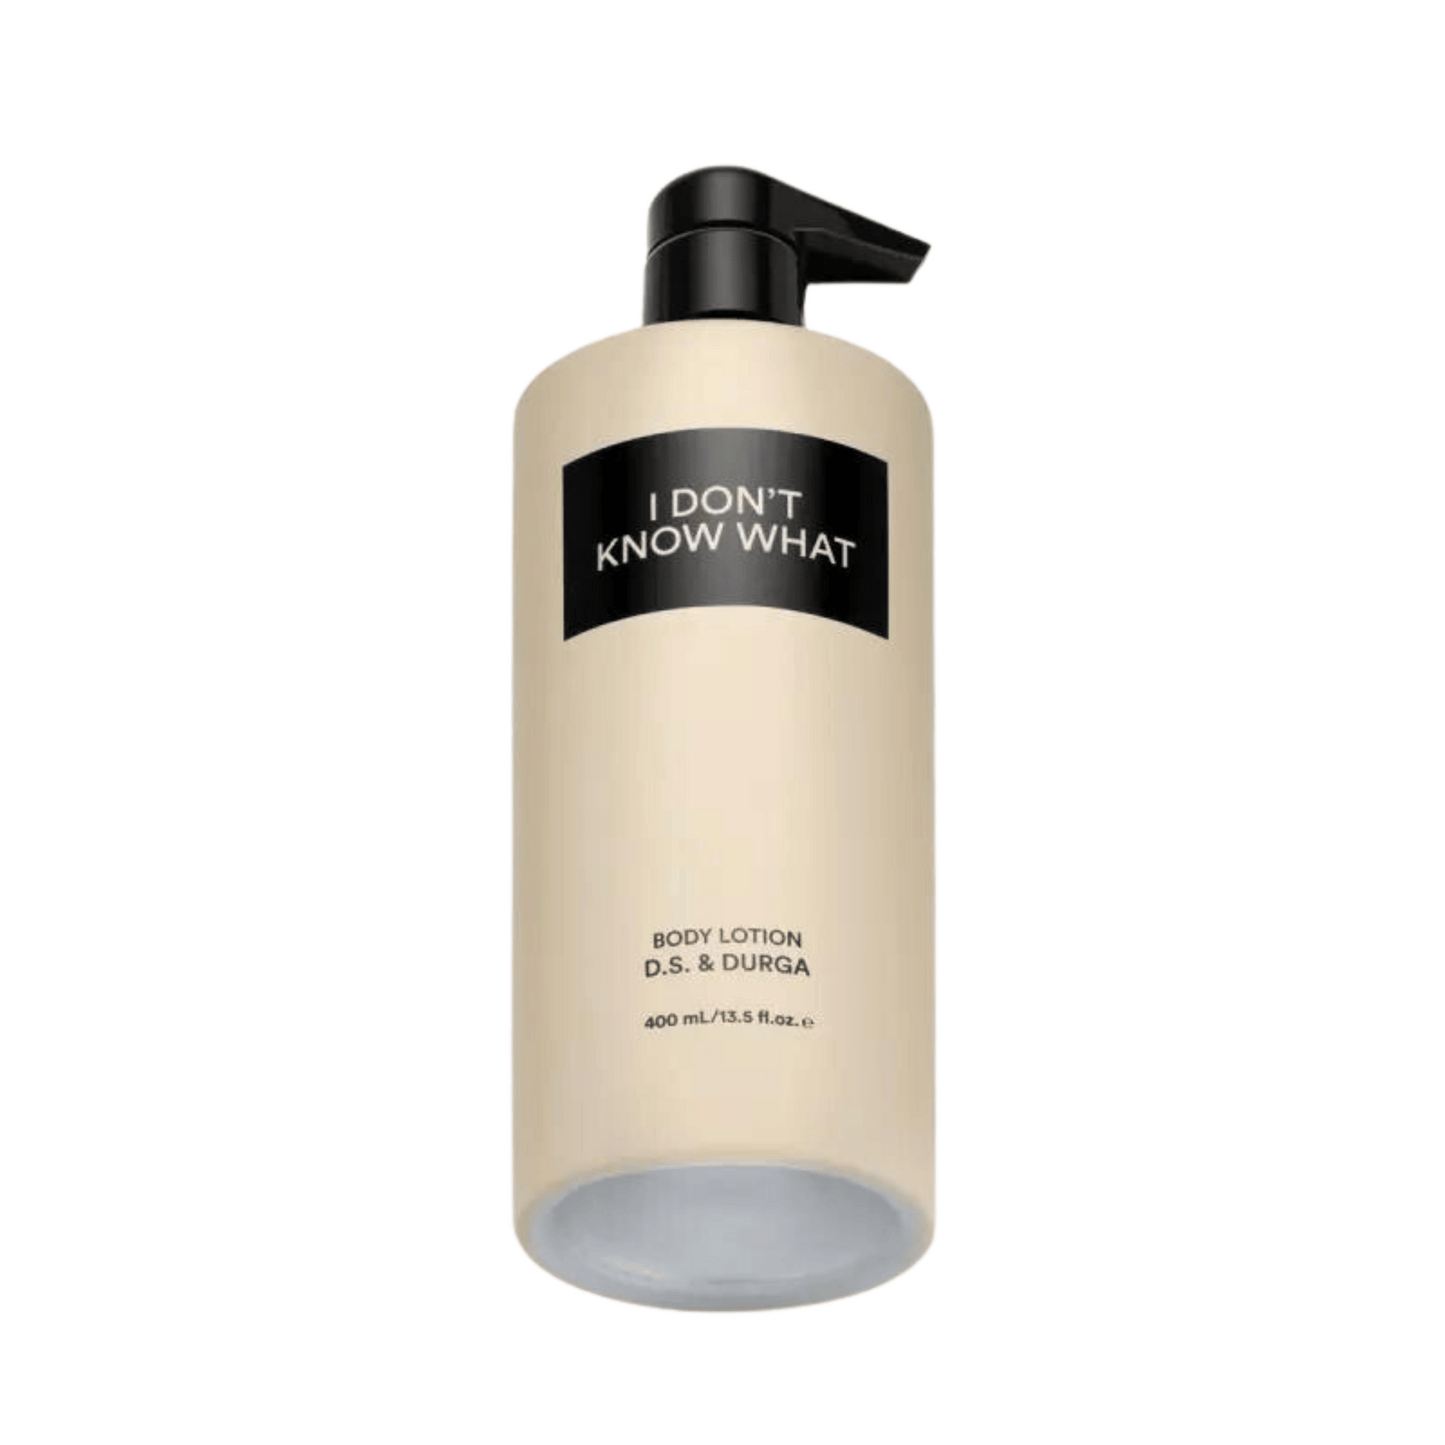 Primary Image of Body Lotion - I Don't Know What